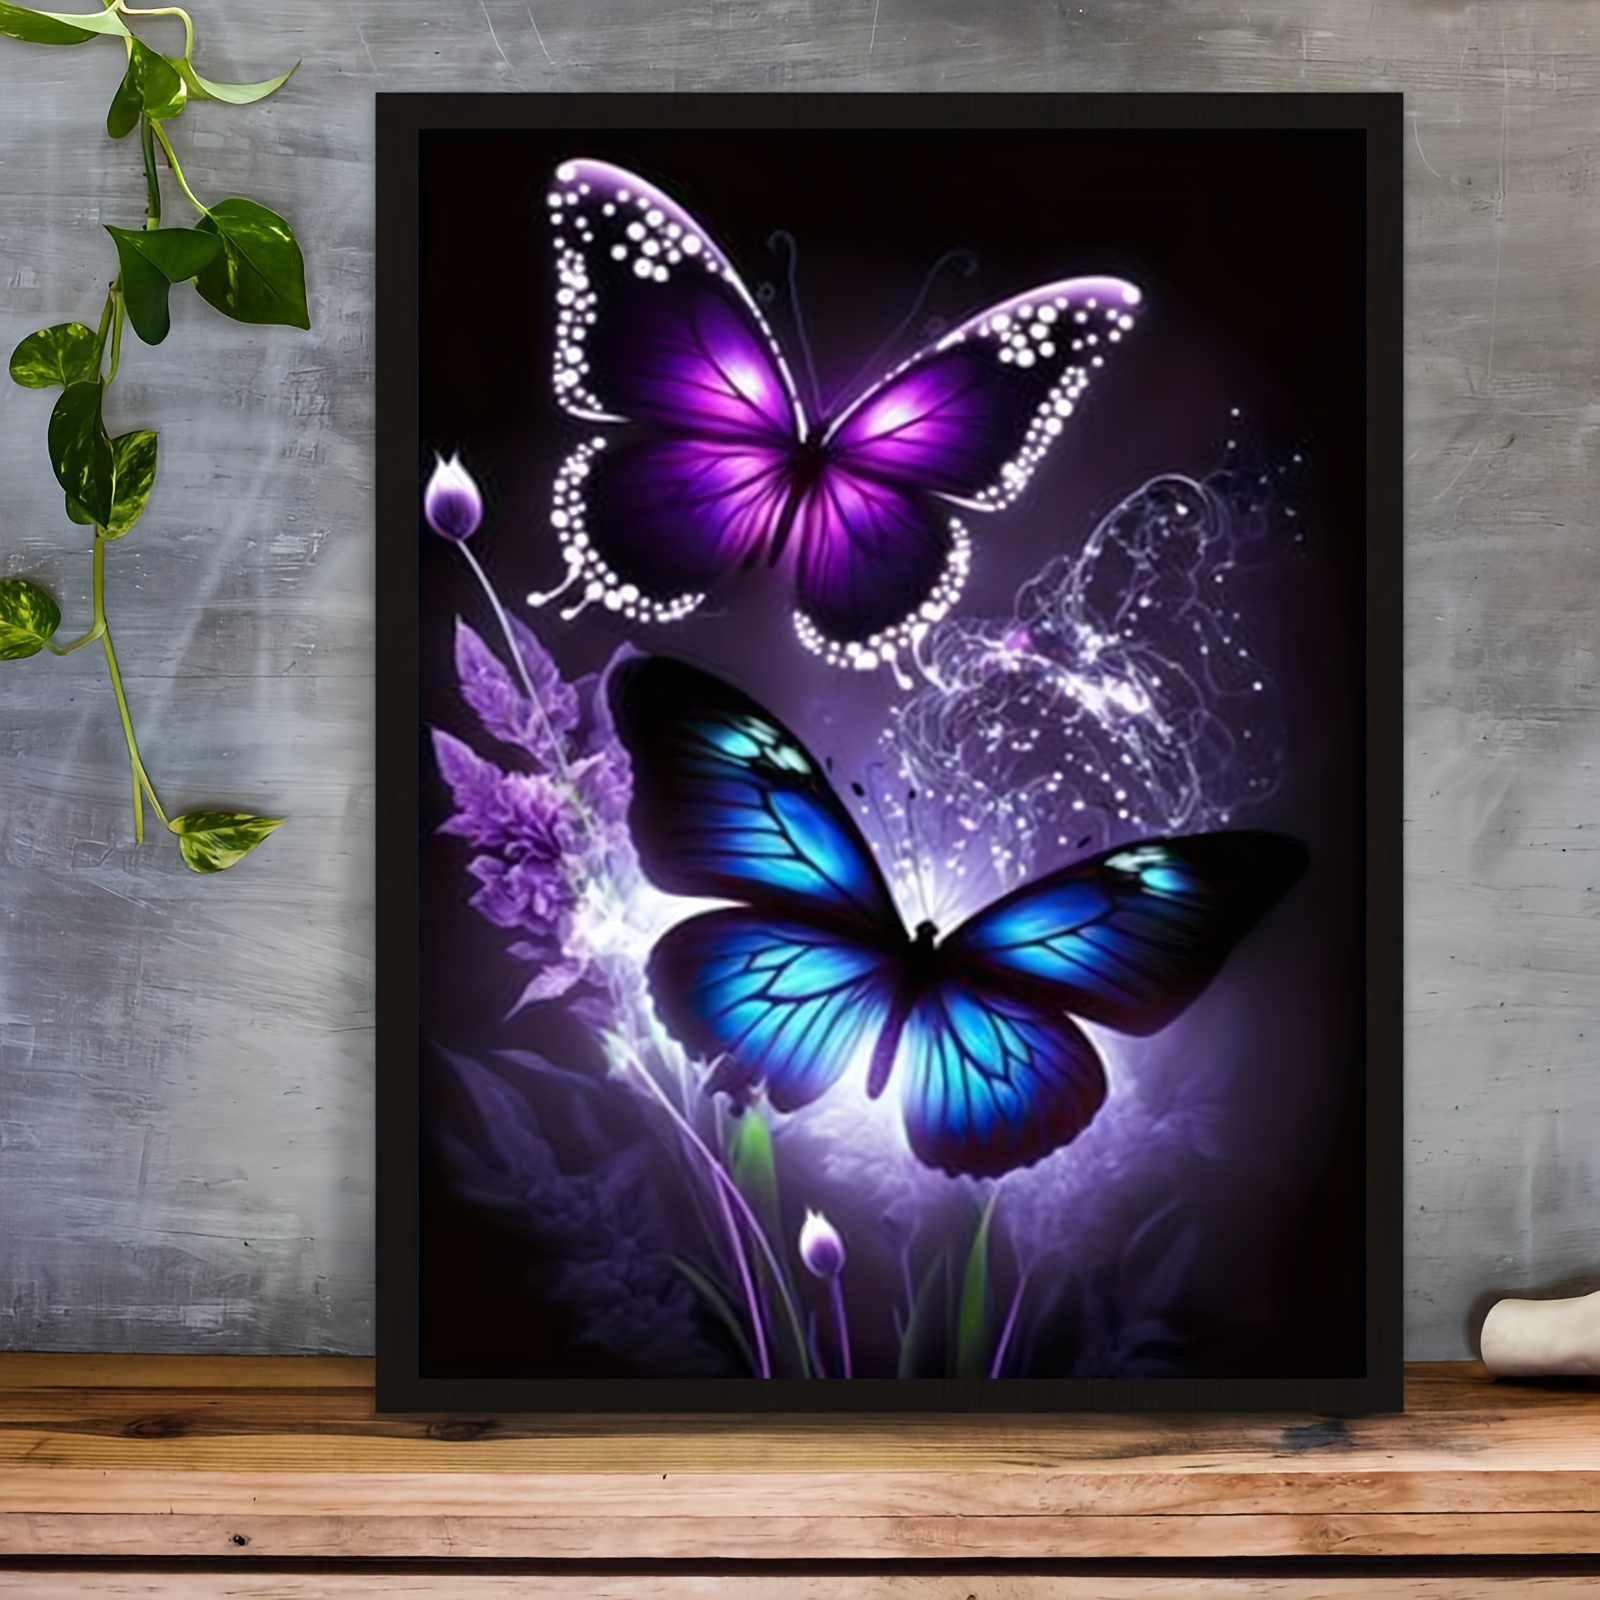 

5d Diamond Painting Kits For Adults Full Diamond Art Animals Butterfly Rhinestone Painting With Diamonds Pictures Arts And Crafts For Home Wall Decor 11.8x15.7 Inches